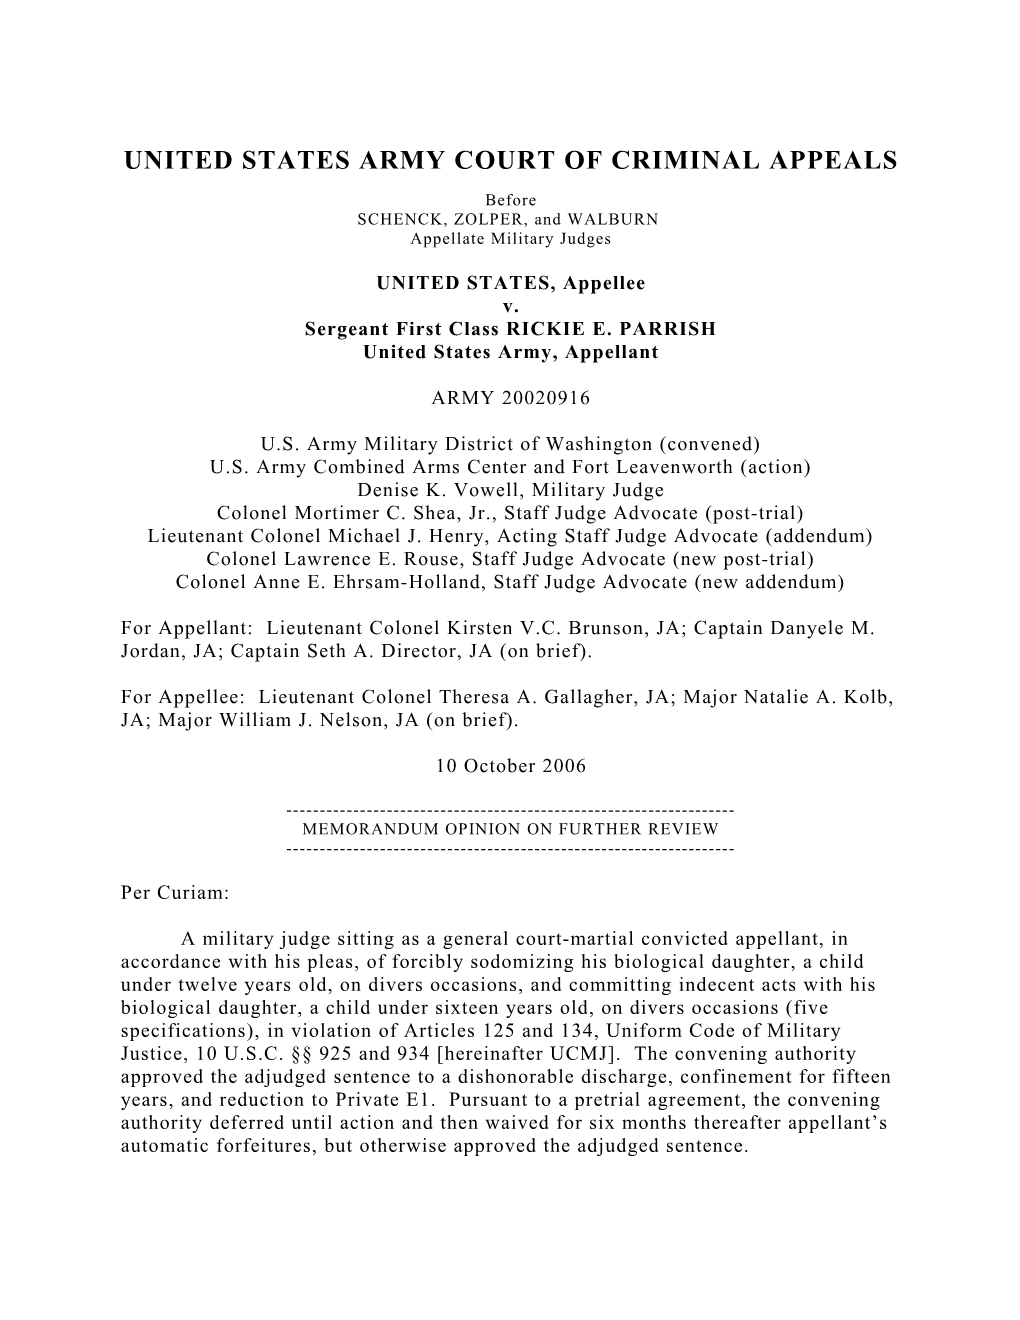 United States Army Court of Criminal Appeals s2